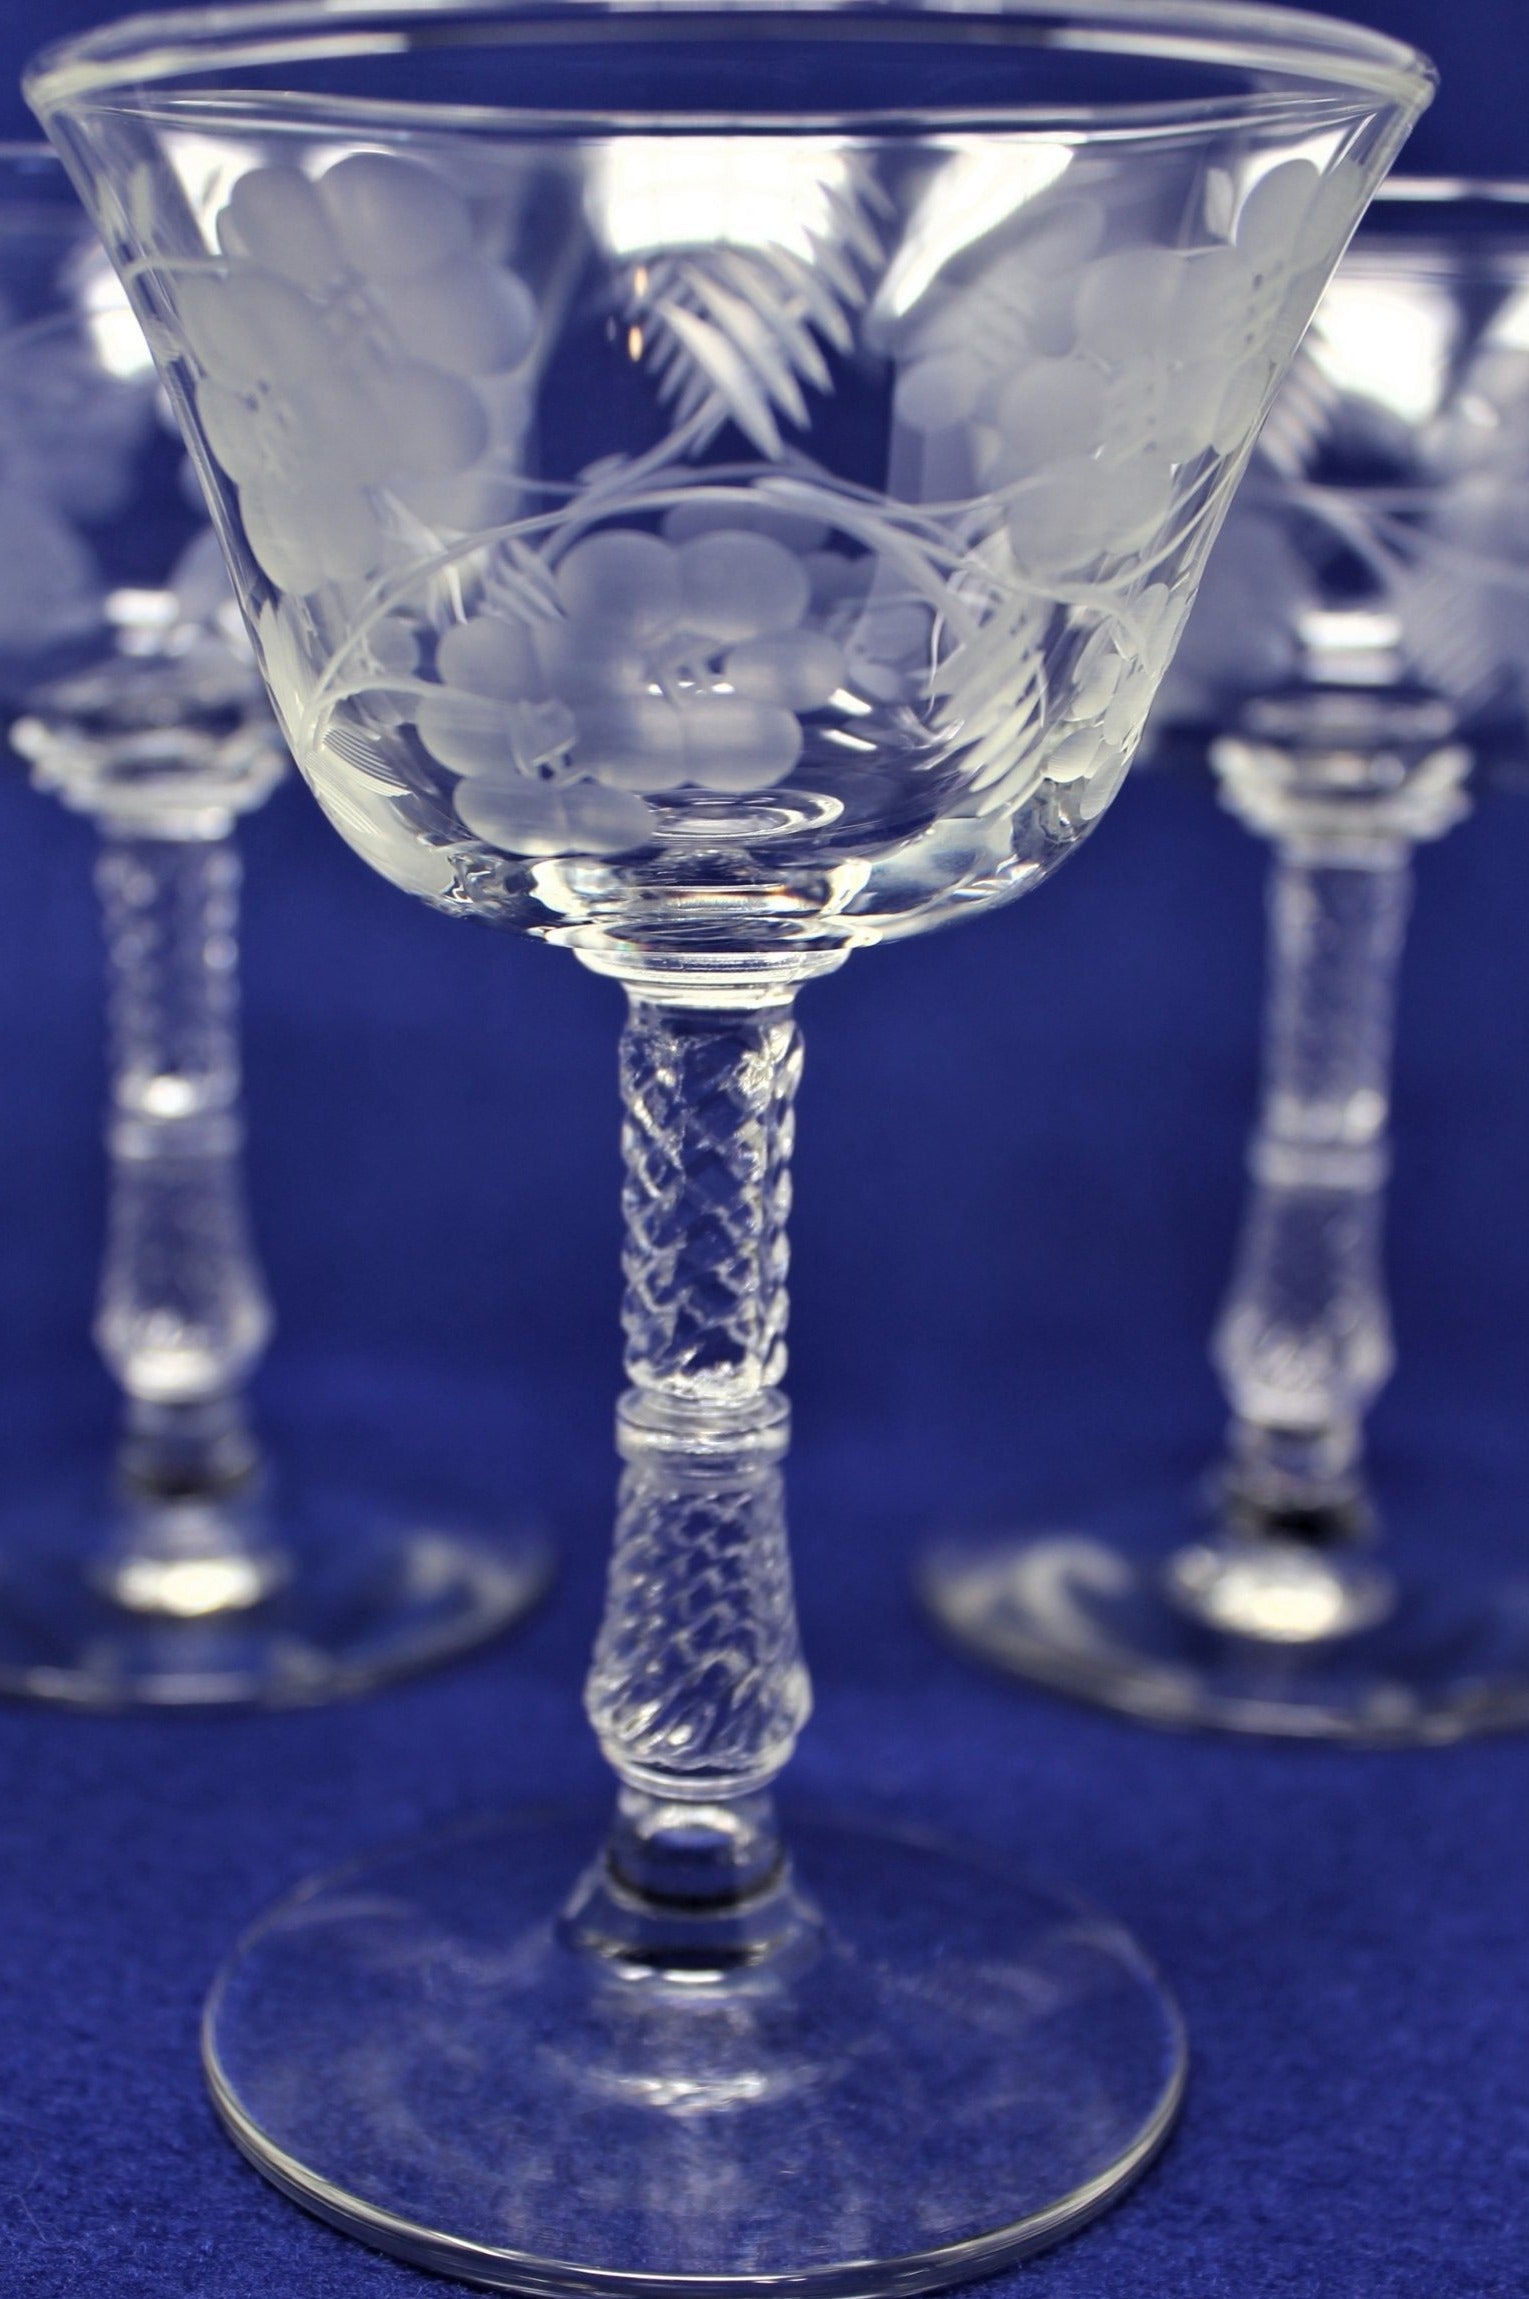 Set of 8 or 6 Crystal Starglow Liquor Cocktail Glasses by Libbey